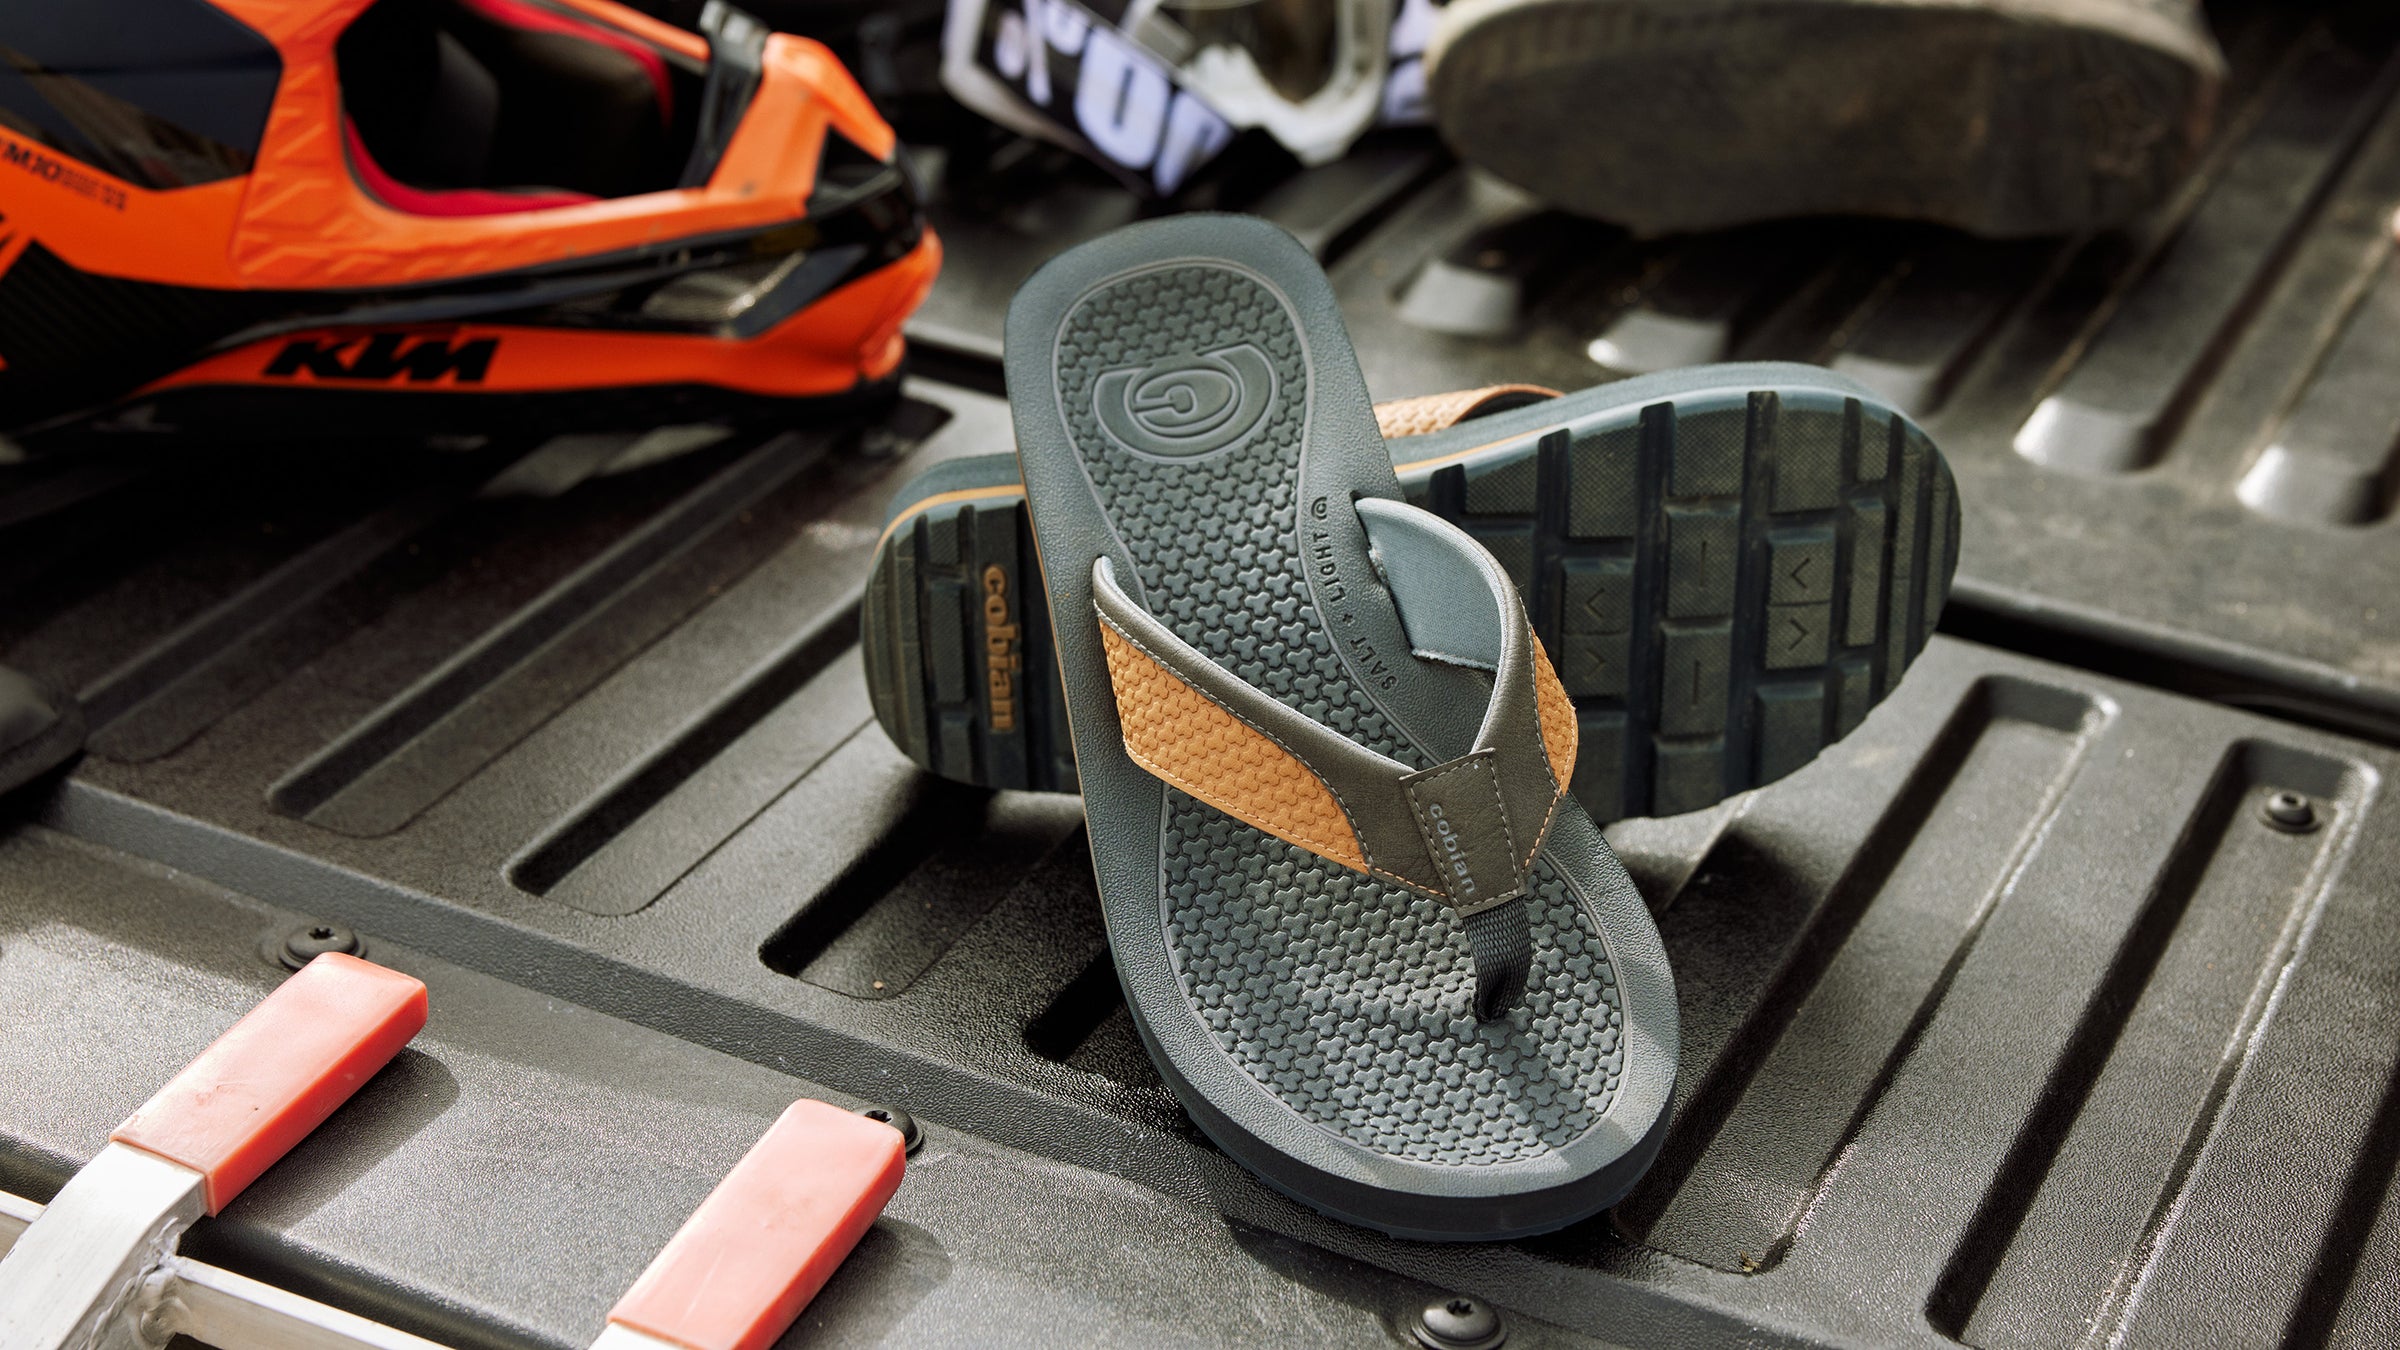 Cobian DRT Sandals in the bed of a pickup truck with motocross gear